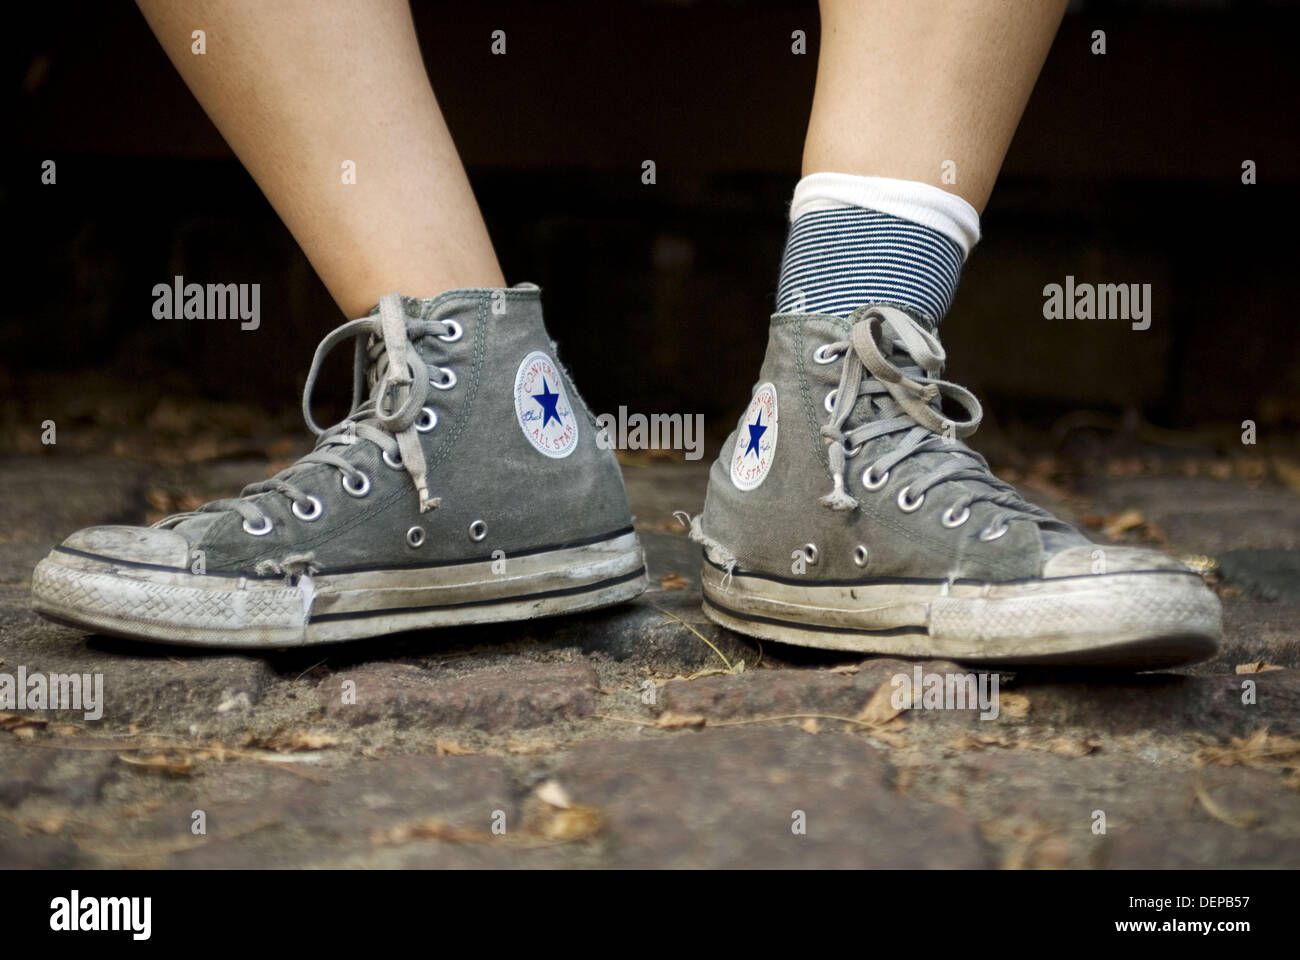 Converse athletic shoes Stock Photo - Alamy